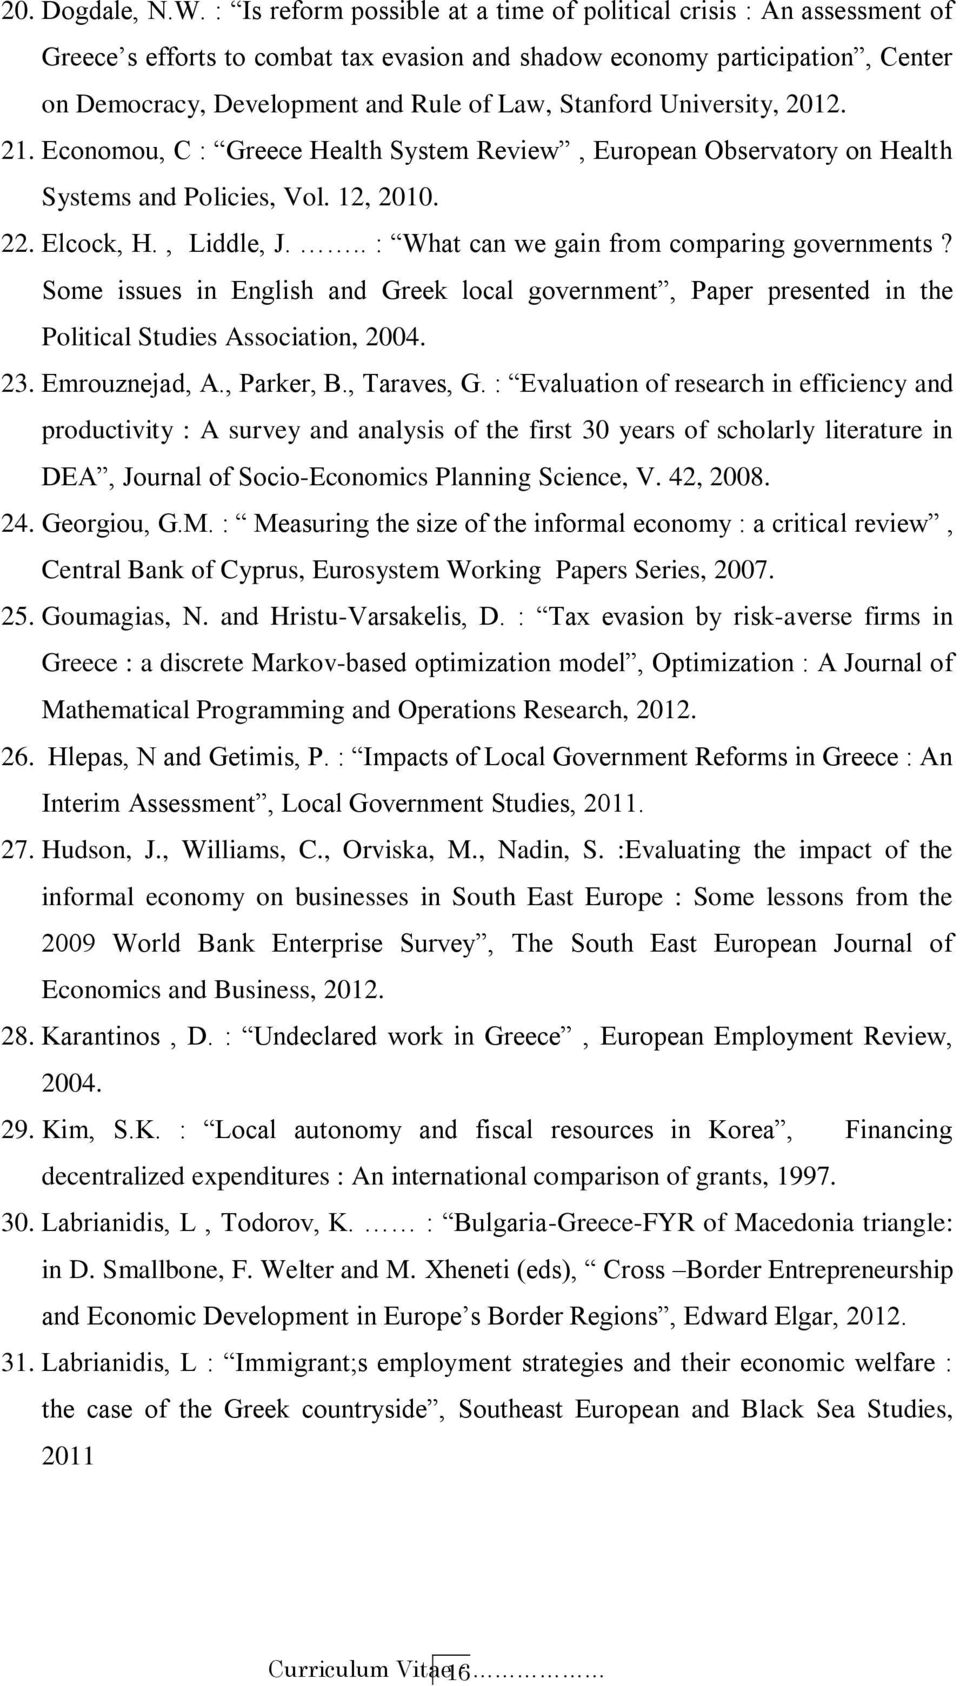 Stanford University, 2012. 21. Economou, C : Greece Health System Review, European Observatory on Health Systems and Policies, Vol. 12, 2010. 22. Elcock, H., Liddle, J.